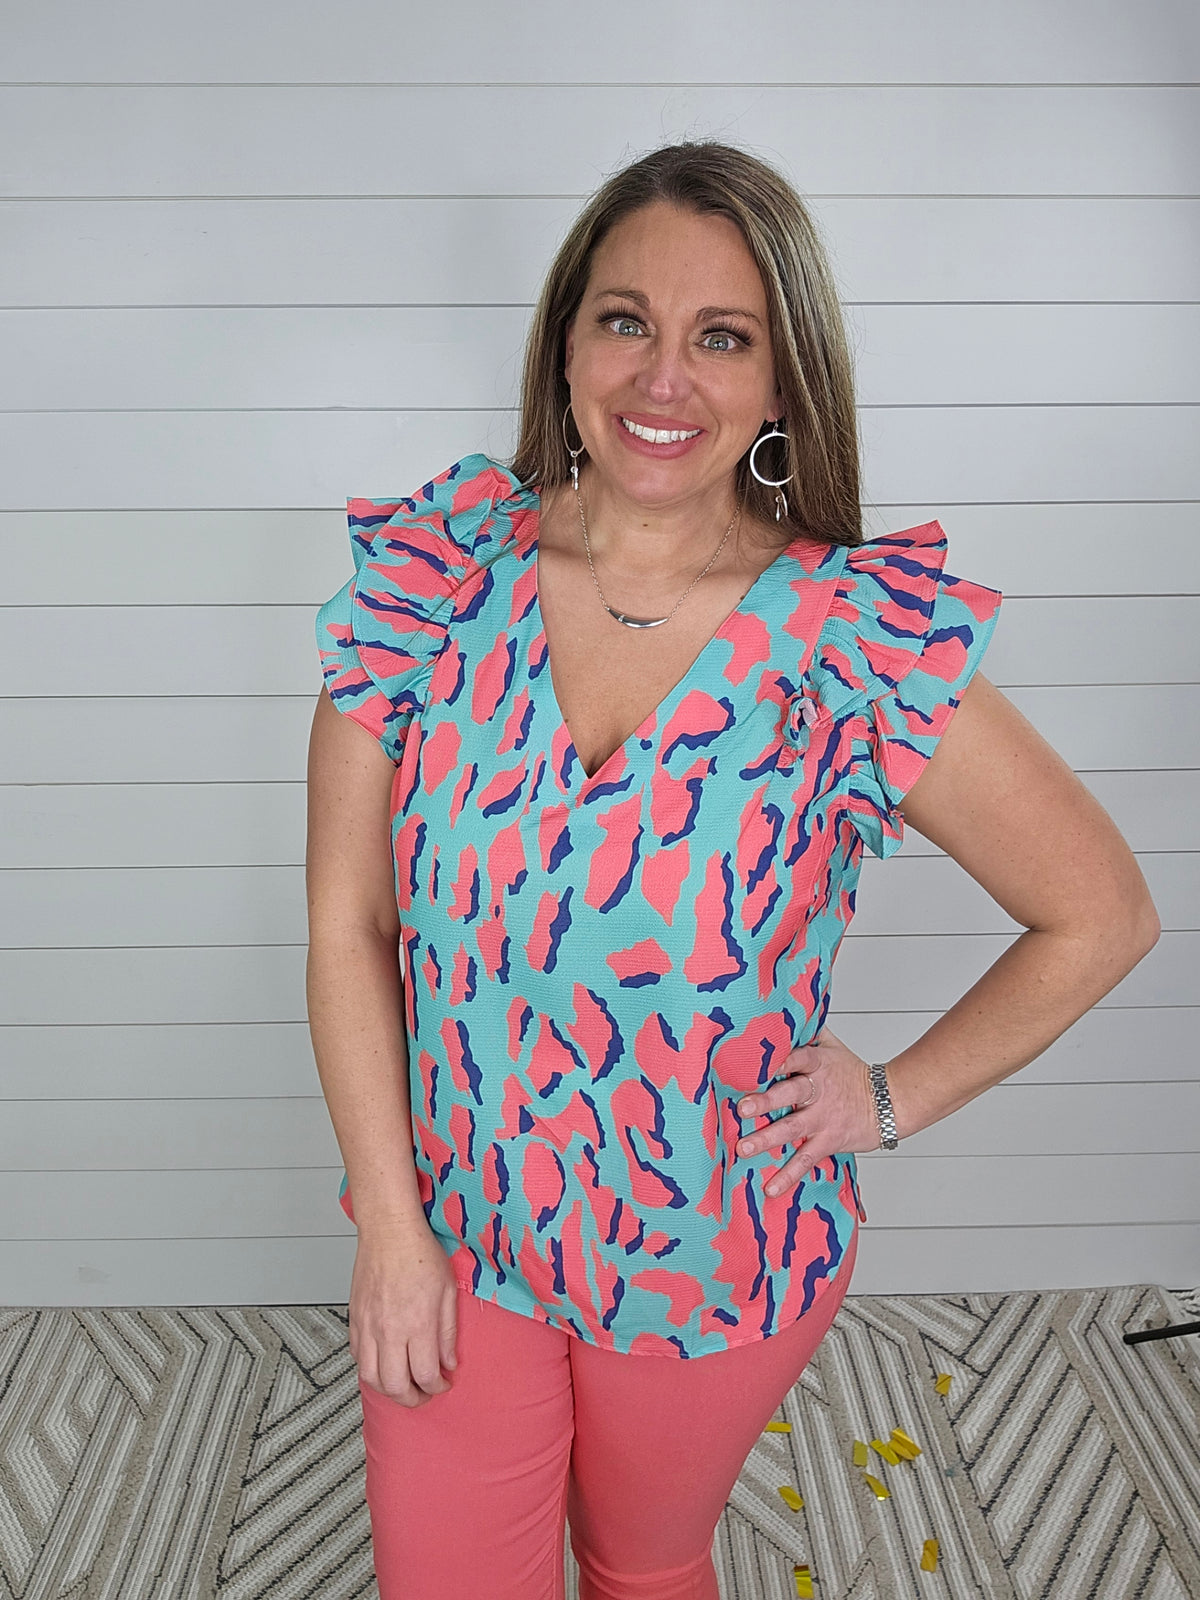 MINT/PINK ANIMAL PINT V NECK WITH RUFFLE SLEEVES TOP